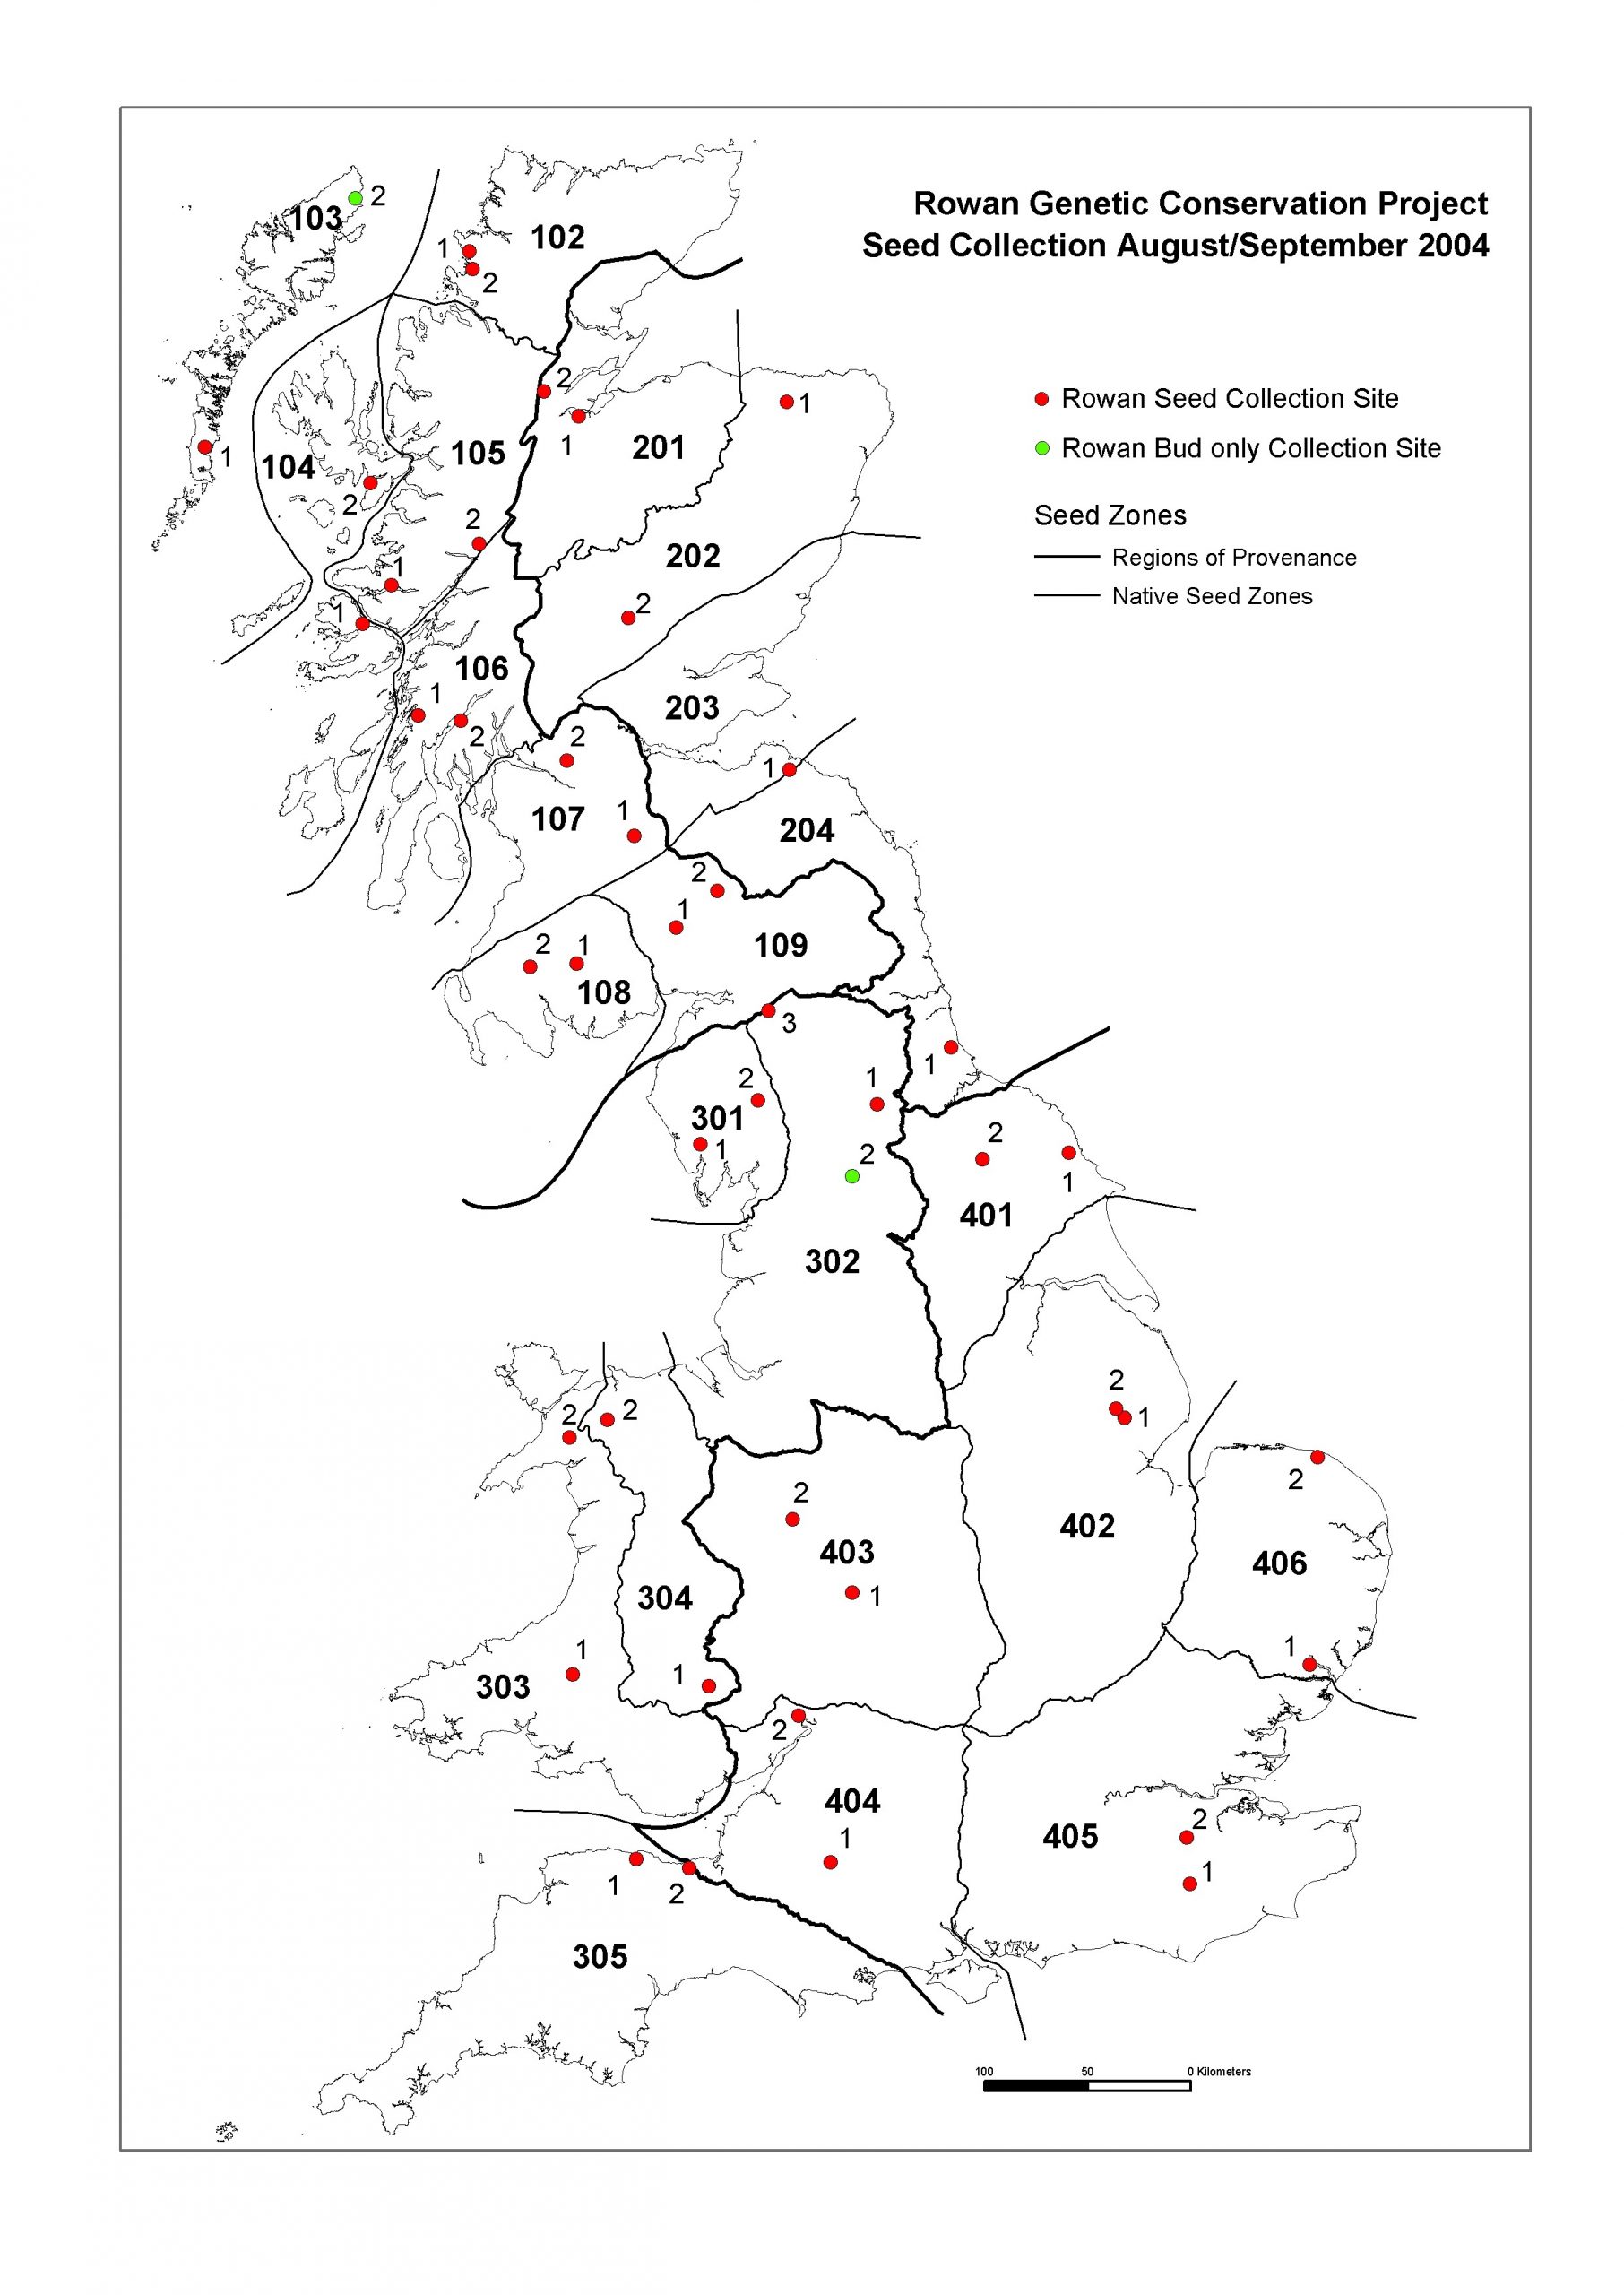 Map of rowan genetic conservation project seed collection August/September 2004